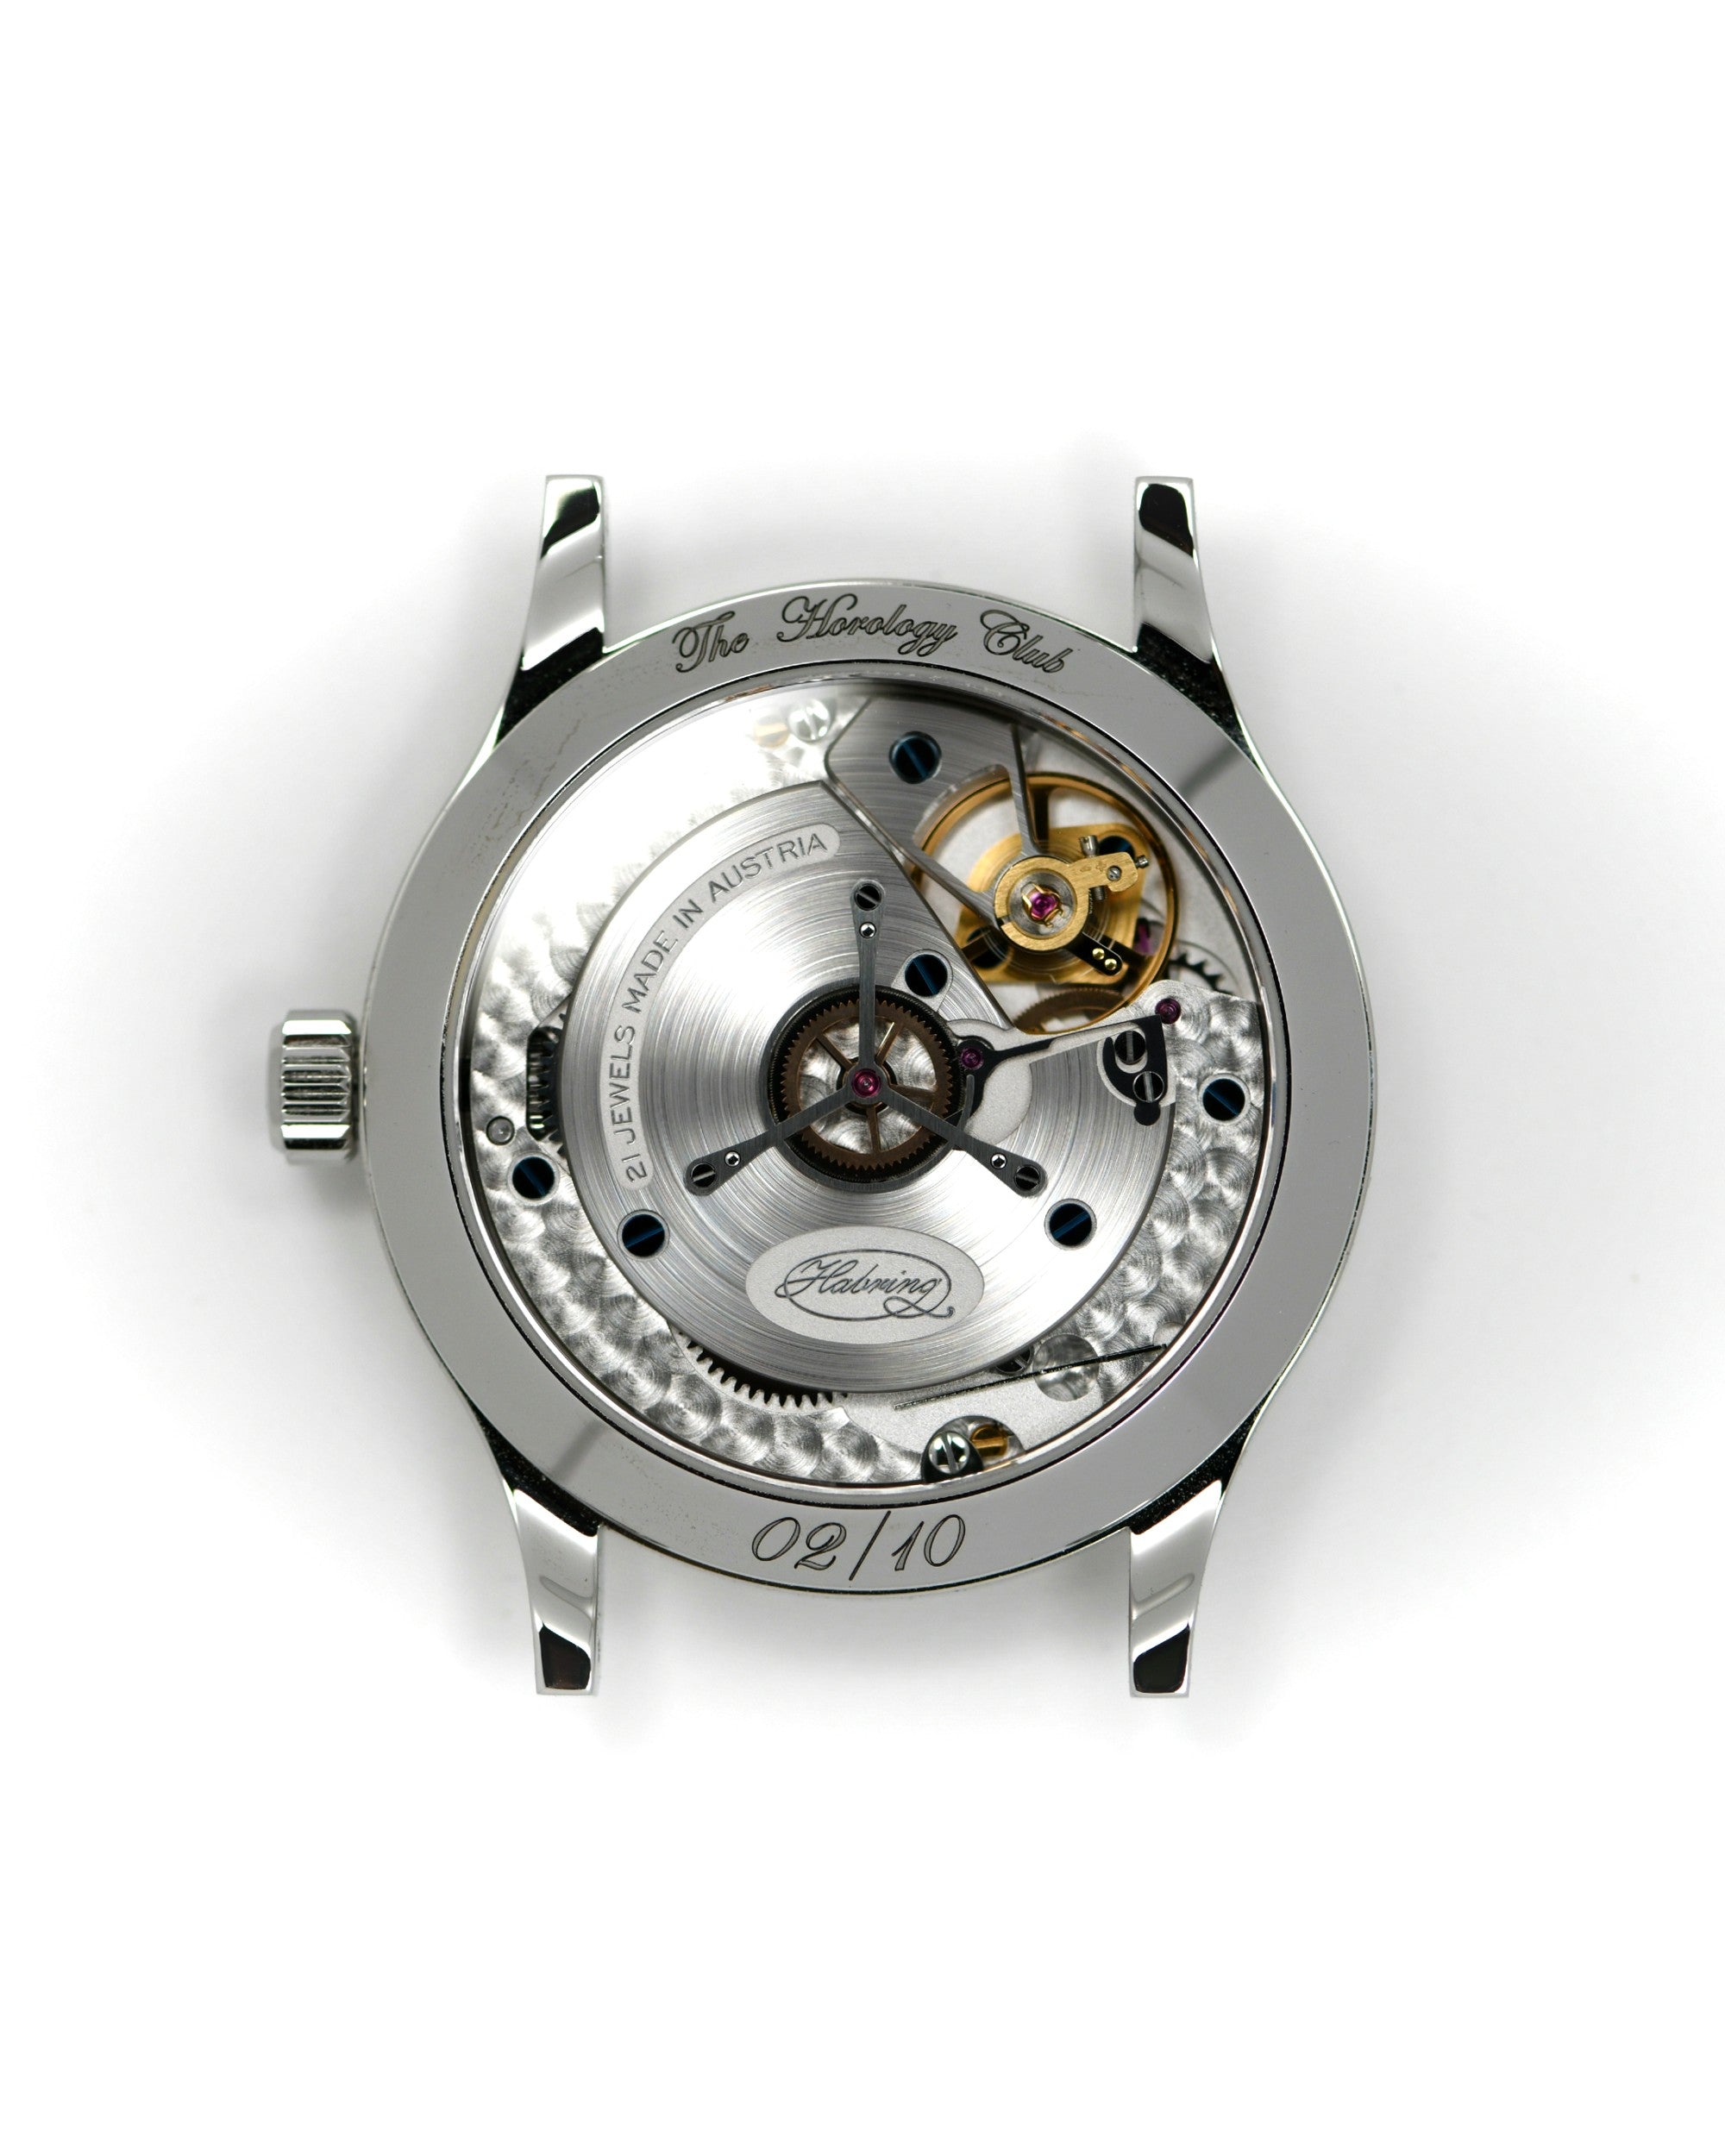 Habring² Erwin ‘THC School Piece’ Edition for The Horology Club